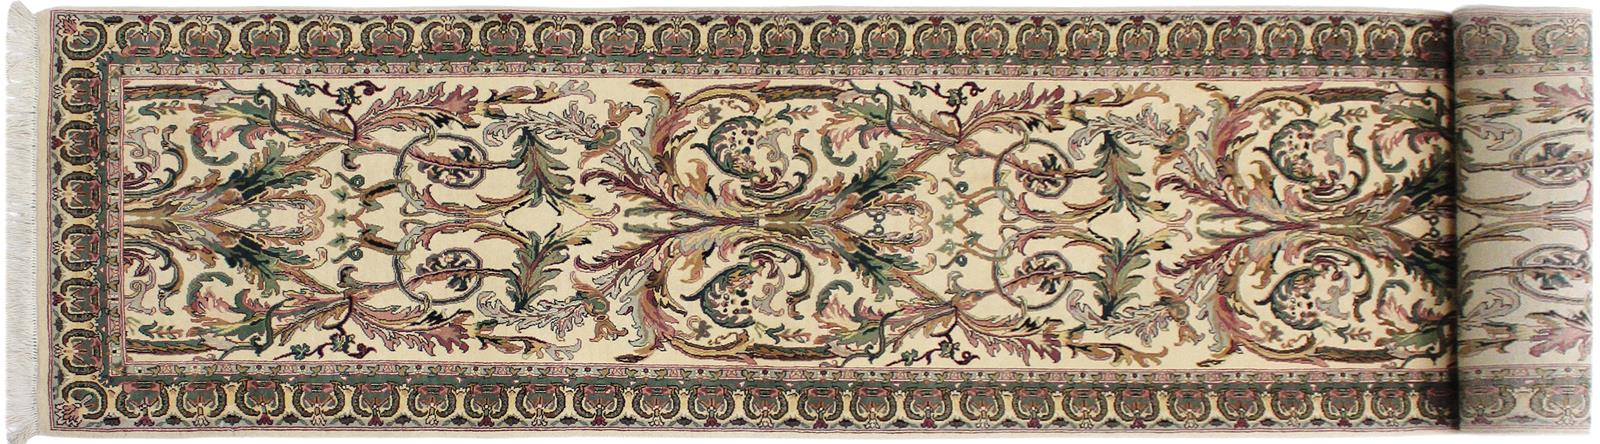 handmade Traditional Bhati Beige Green Hand Knotted RUNNER 100% WOOL area rug 3x12